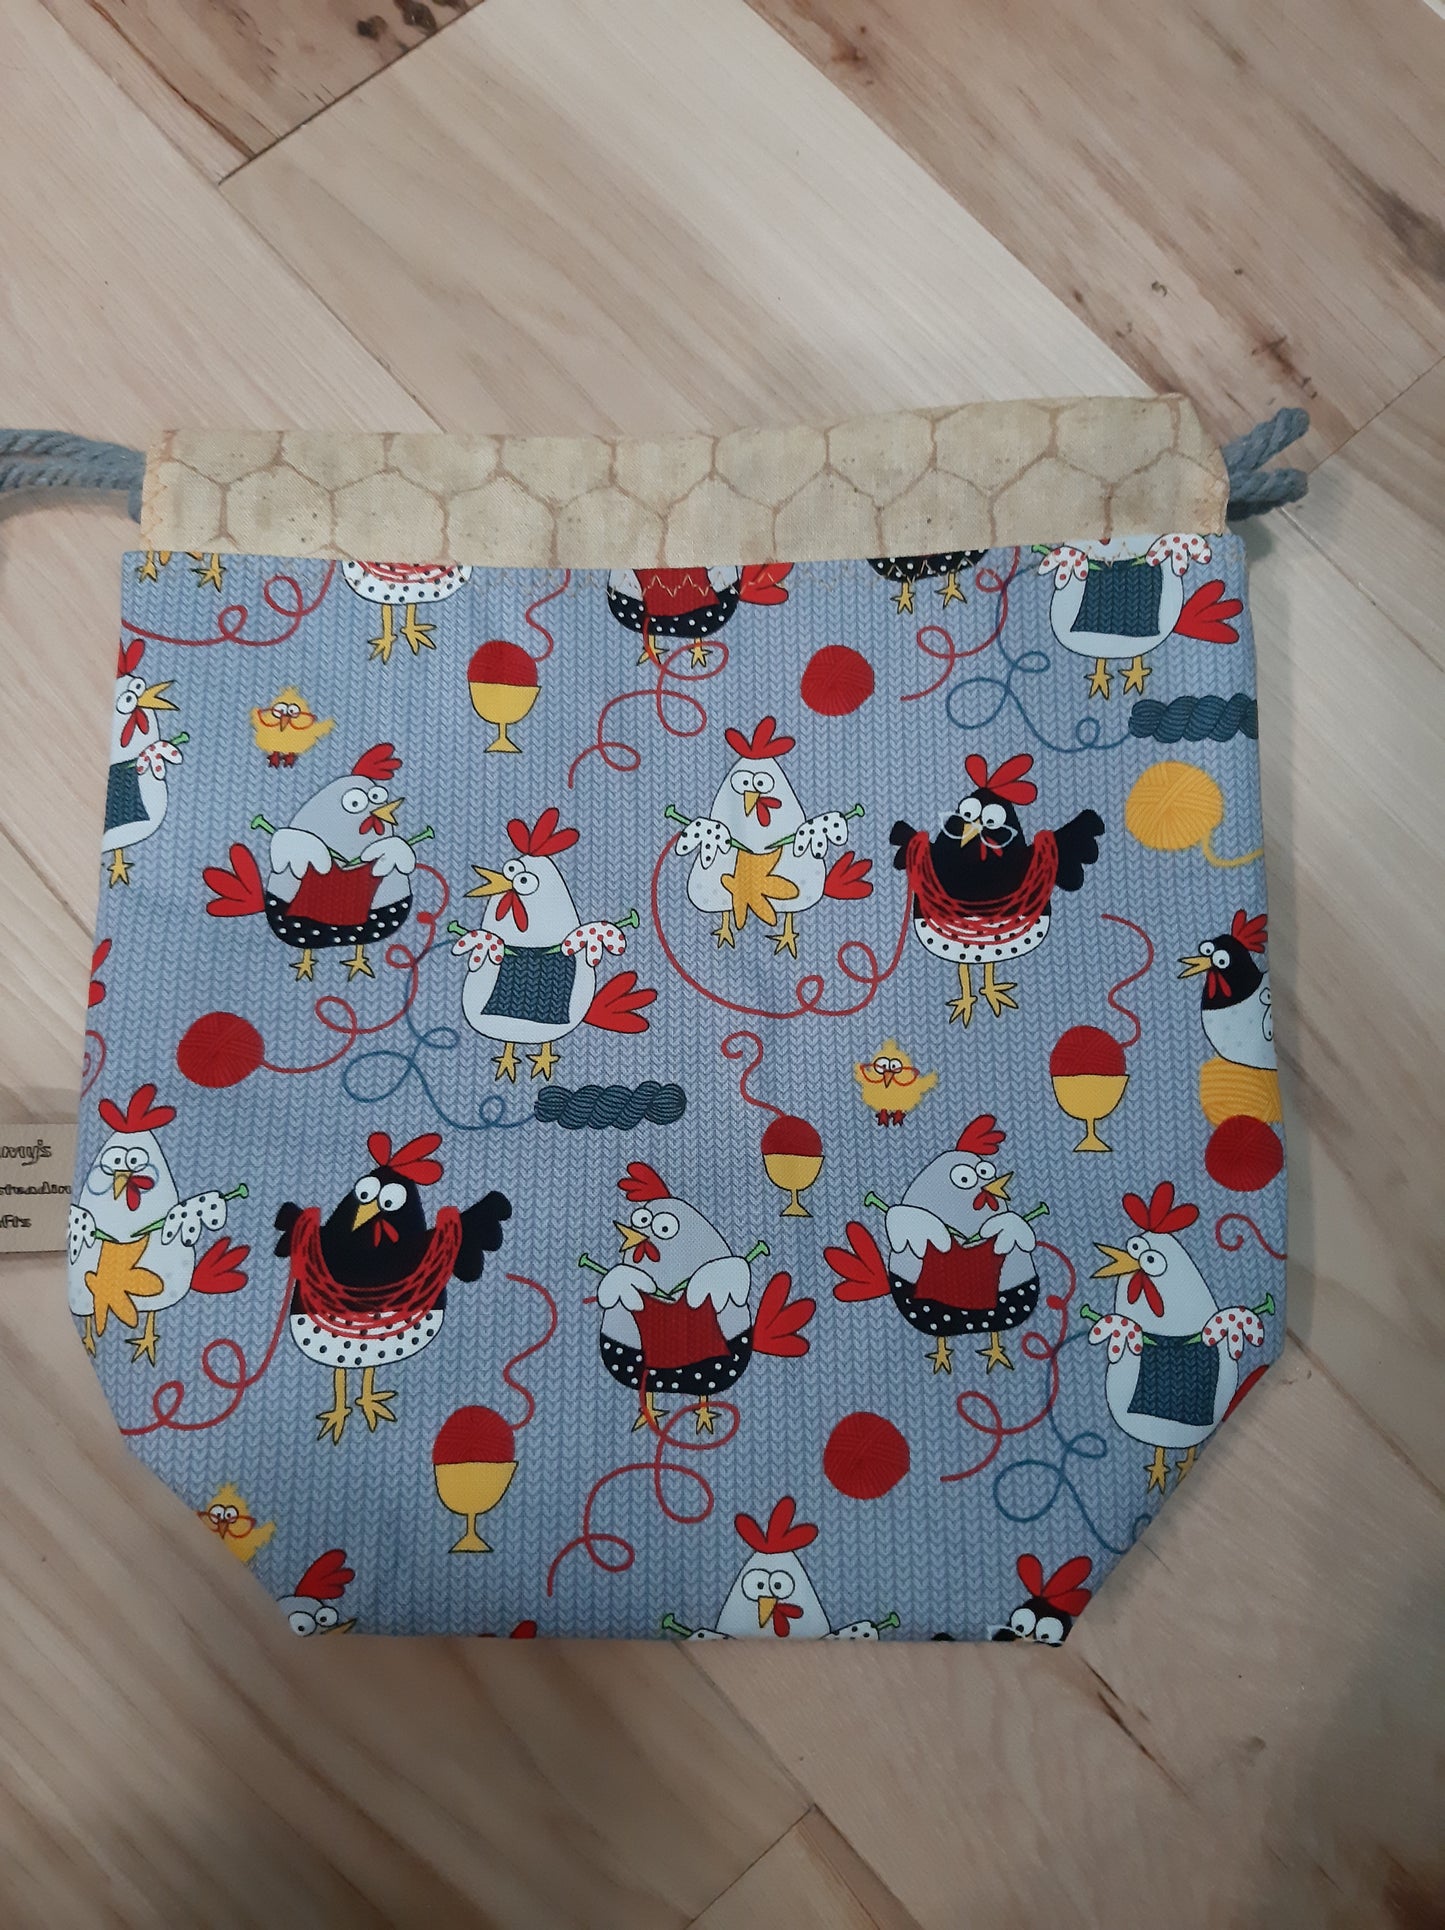 Knitting Chickens ~ Project bags